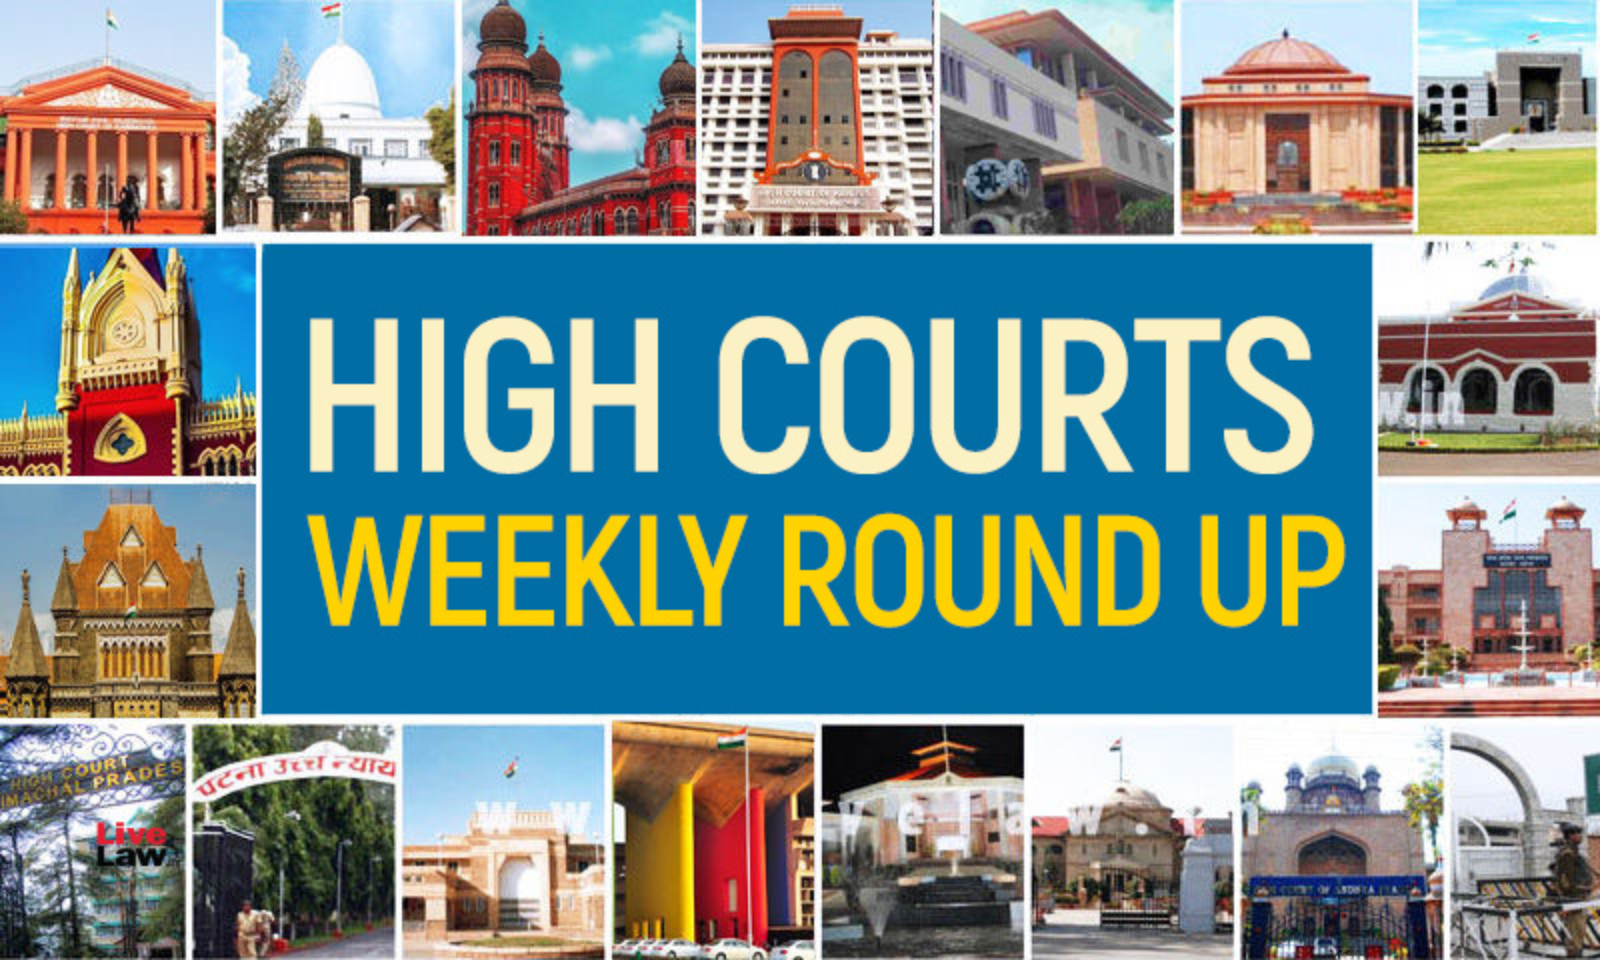 Ghaziabad School Girl Sex - All High Courts Weekly Round-Up [May 30, 2022 - June 05, 2022]